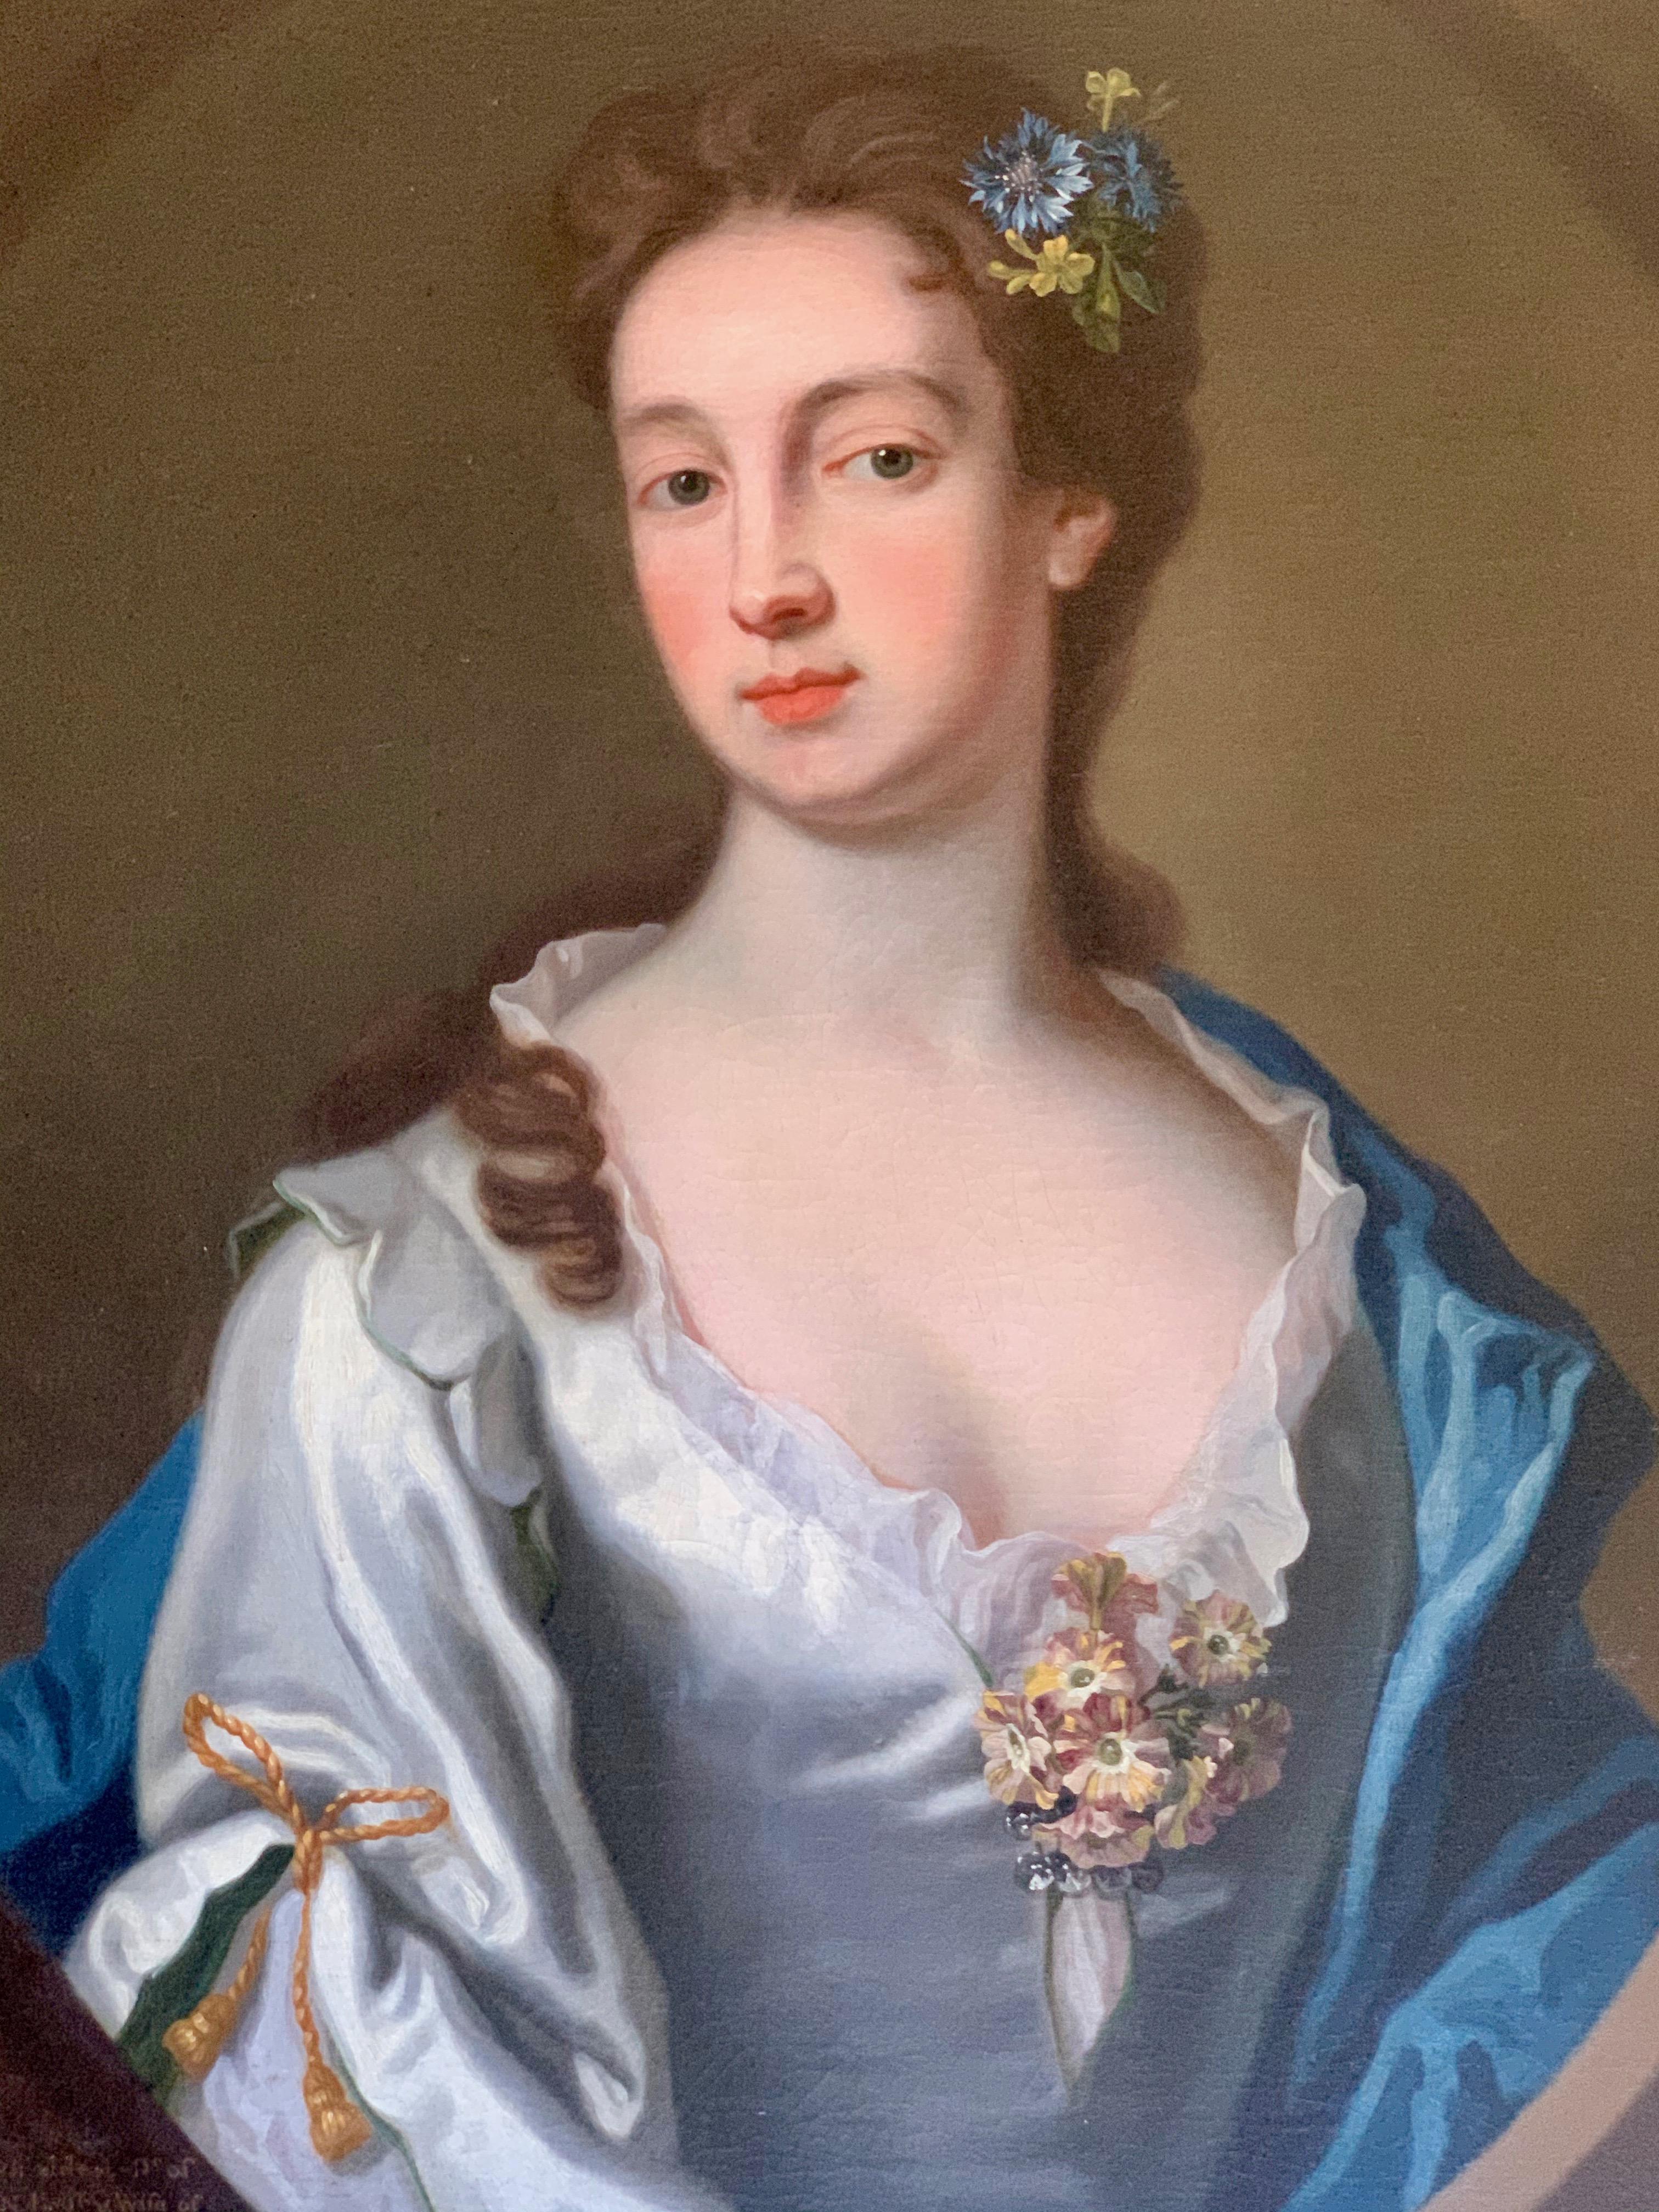 Attributed to George Knapton Interior Painting - 18th Century English Portrait of a Lady in a White and Blue Silk Dress.